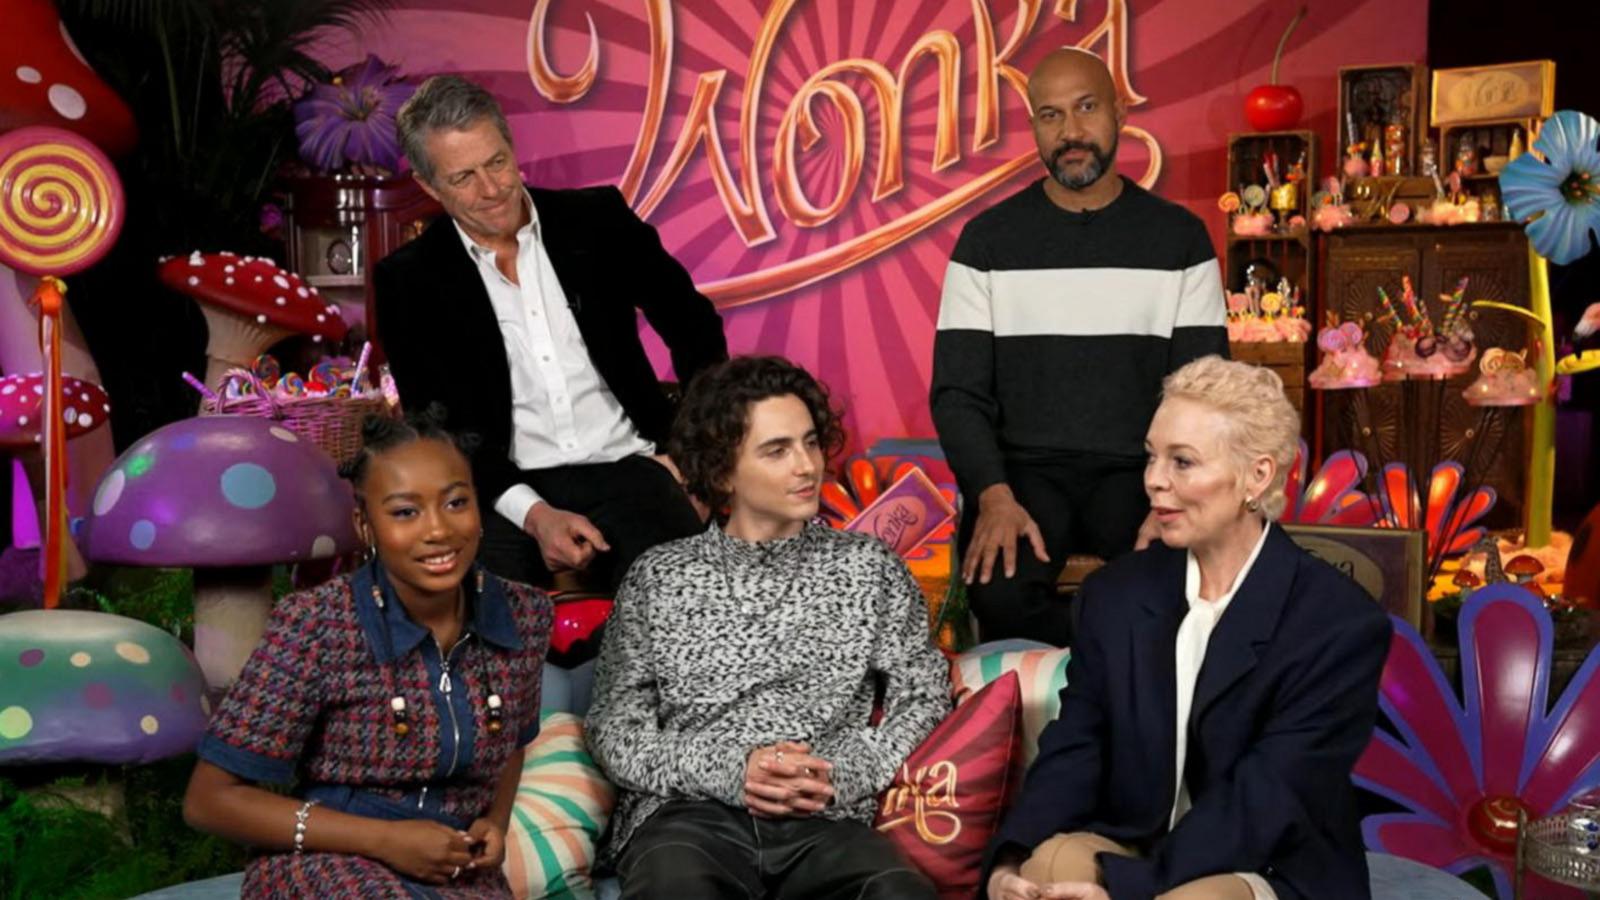 WATCH: Cast of Willy Wonka Reunites and Gives Us All the Feels